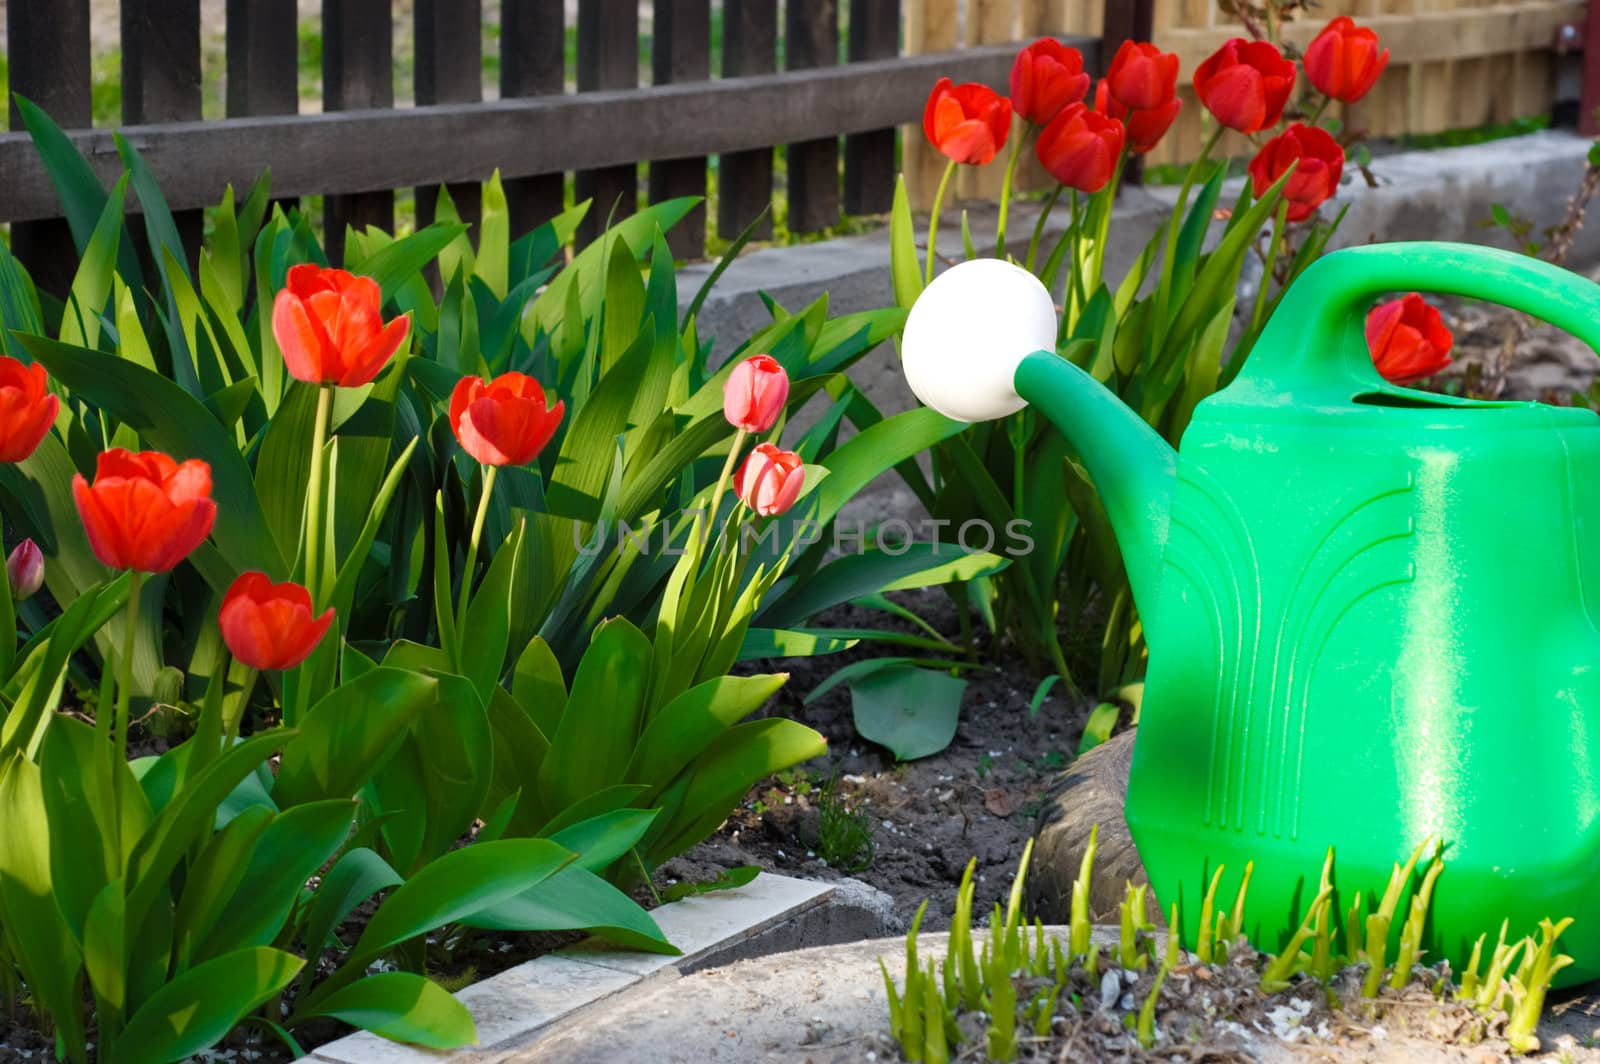 Watering can among red tulips in yard